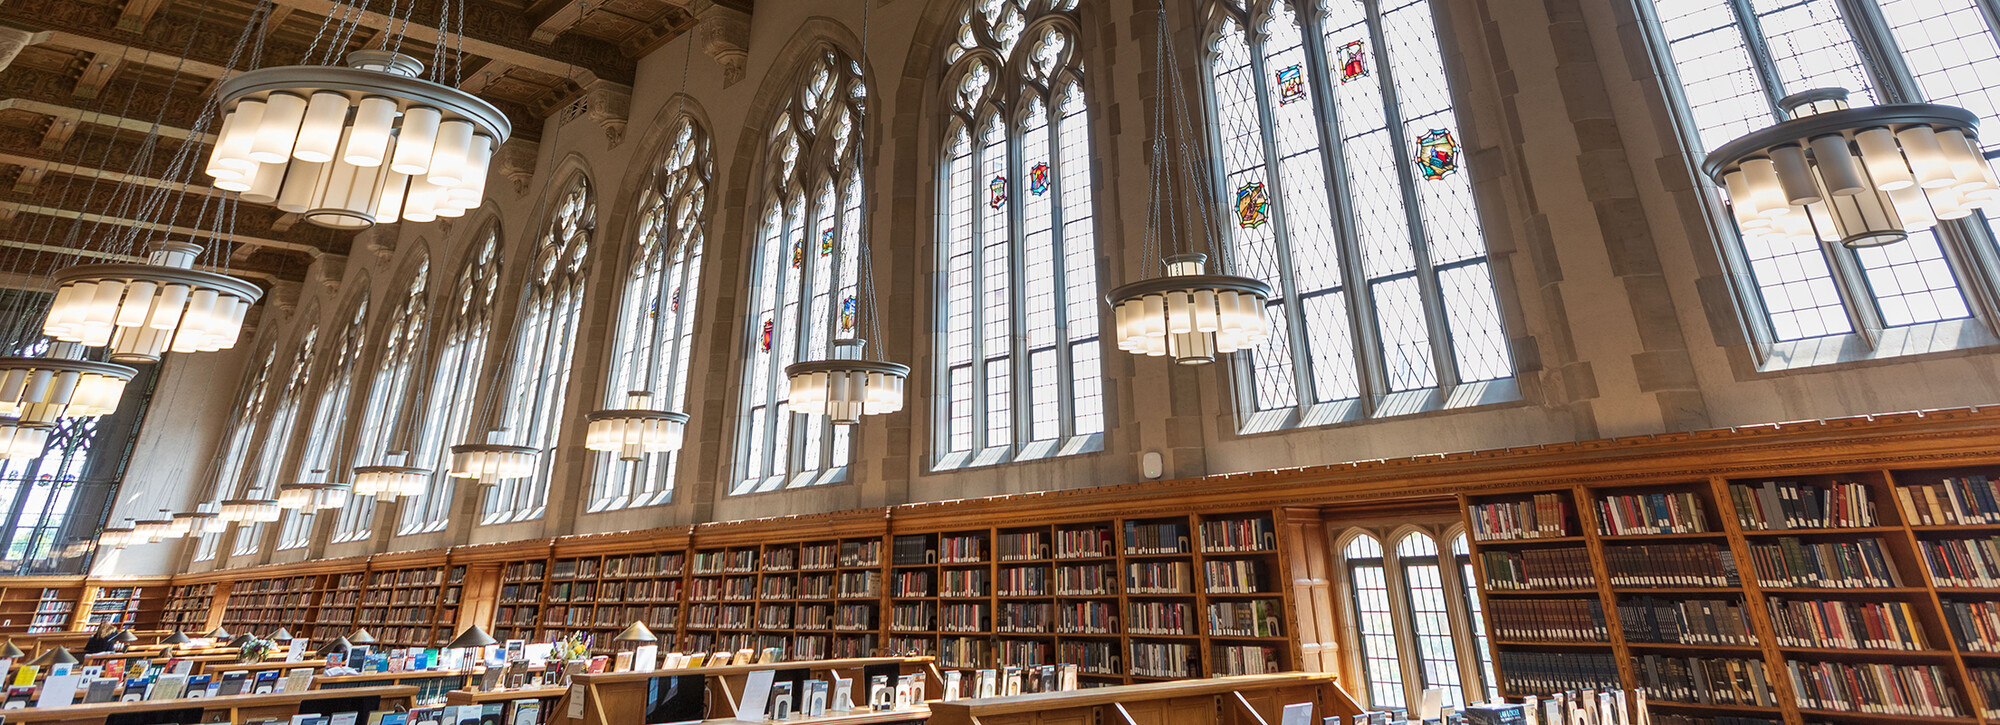 main reading room in the Law Library